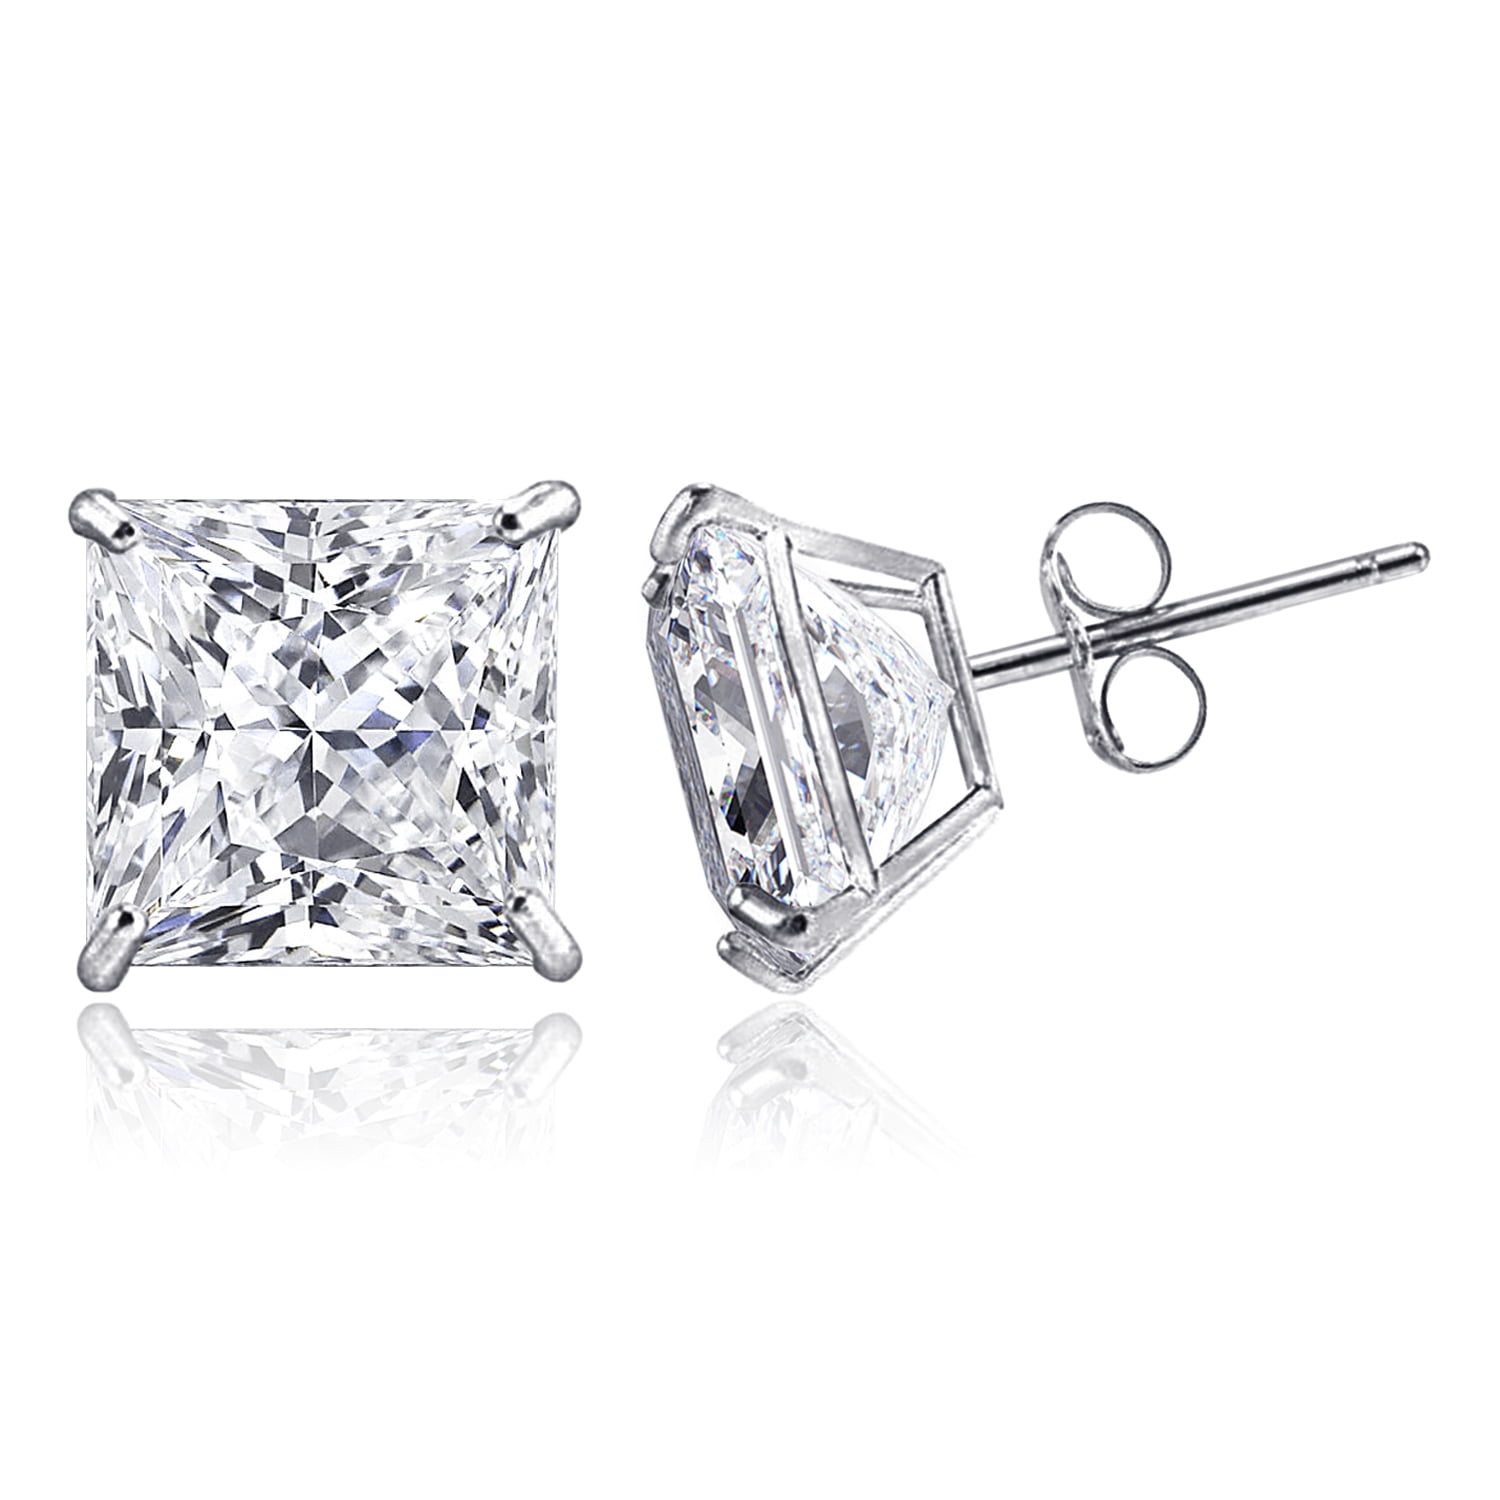 Details about   2.70 CT White Round CZ Lever Back Earrings 14K White Gold Finish 925 Silver 